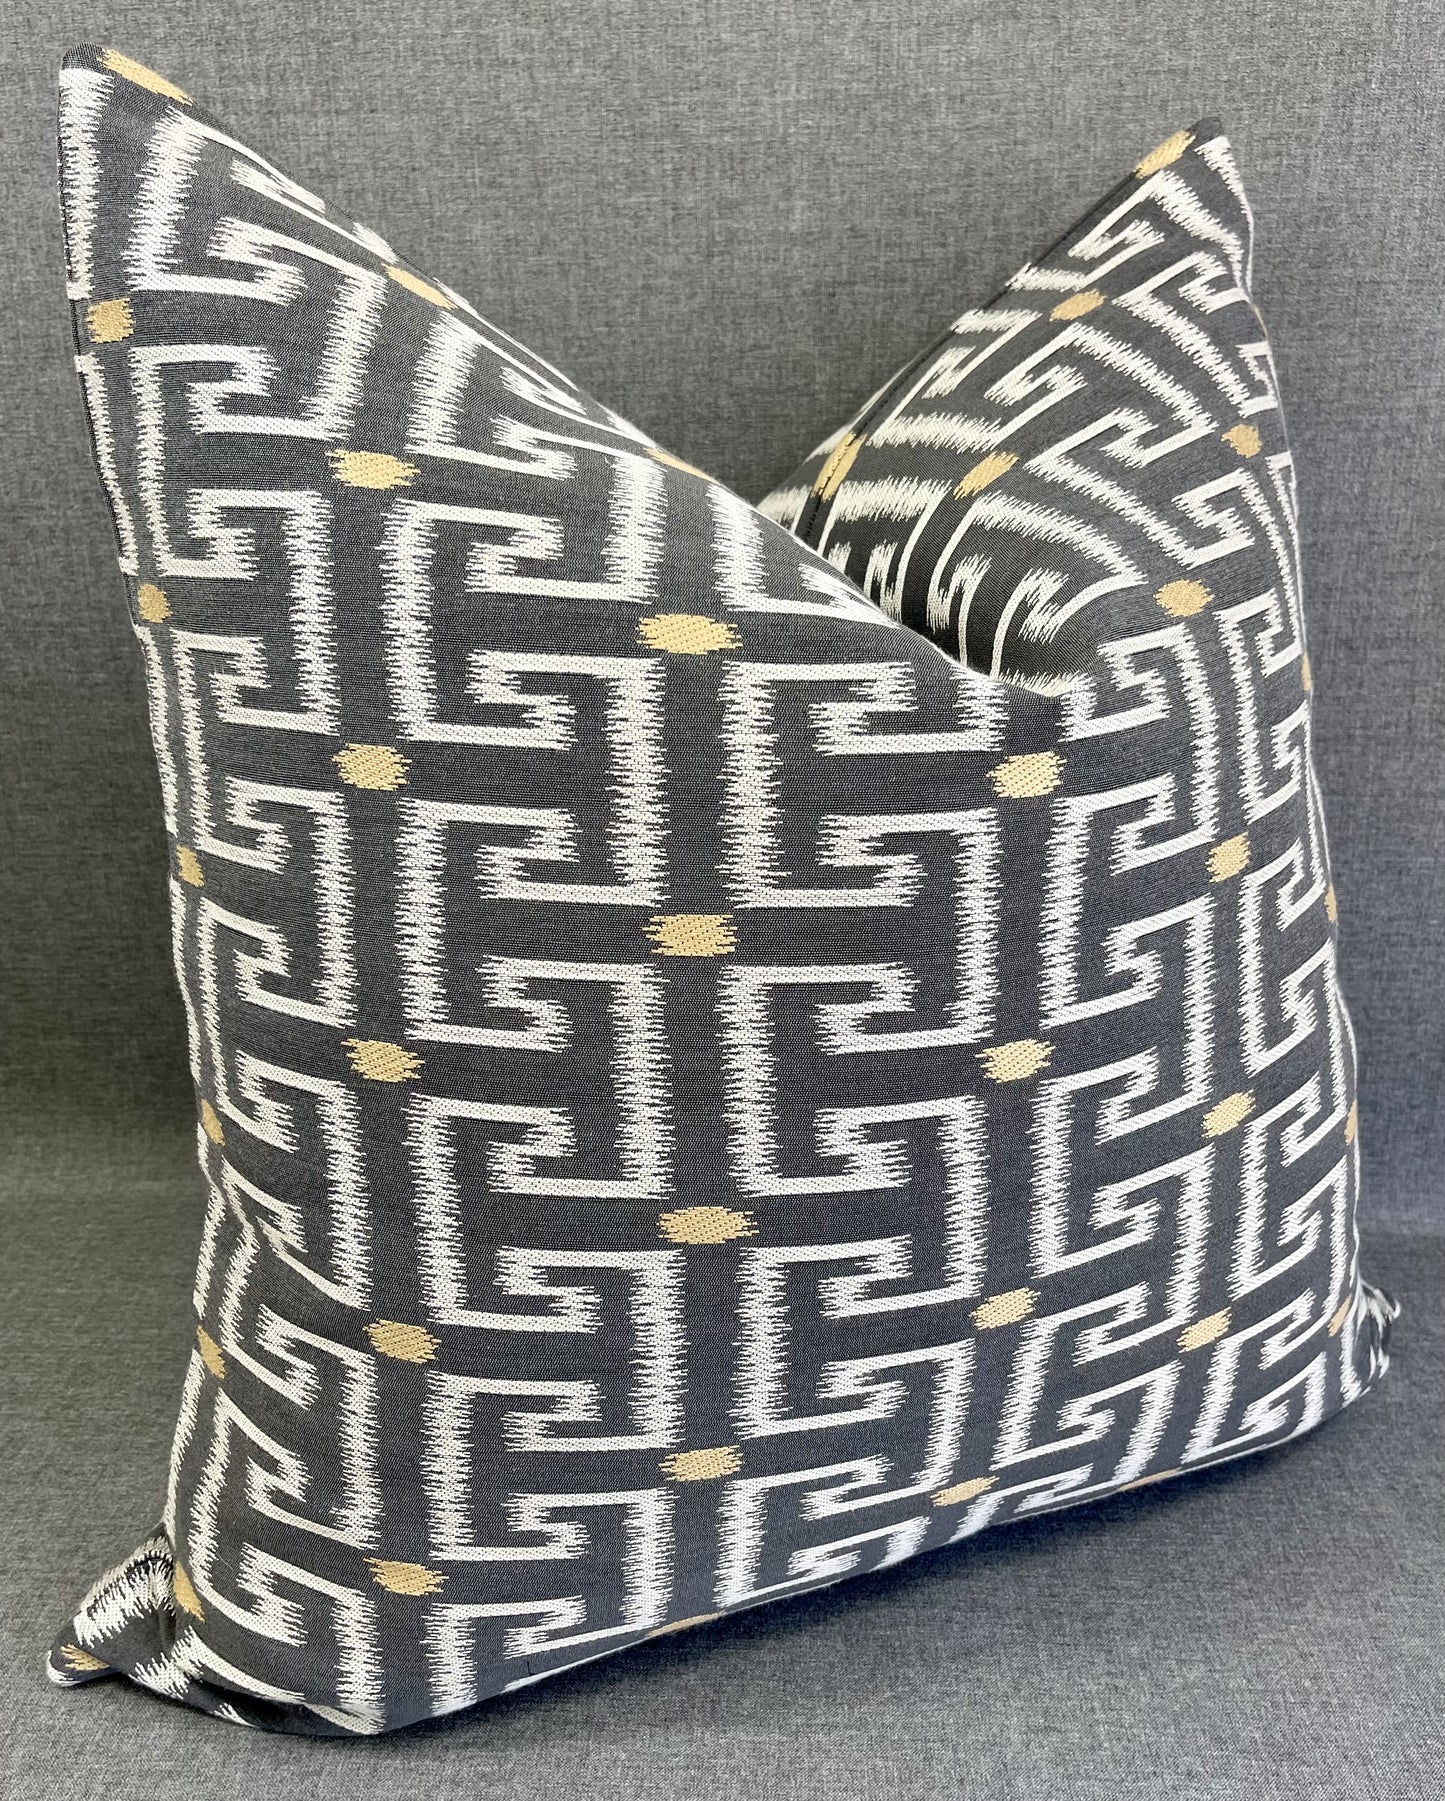 Luxury Pillow - 24" x 24" - Rachel Charcoal;  Beautifully embroidered in a white interlocking pattern with yellow dots on a charcoal background